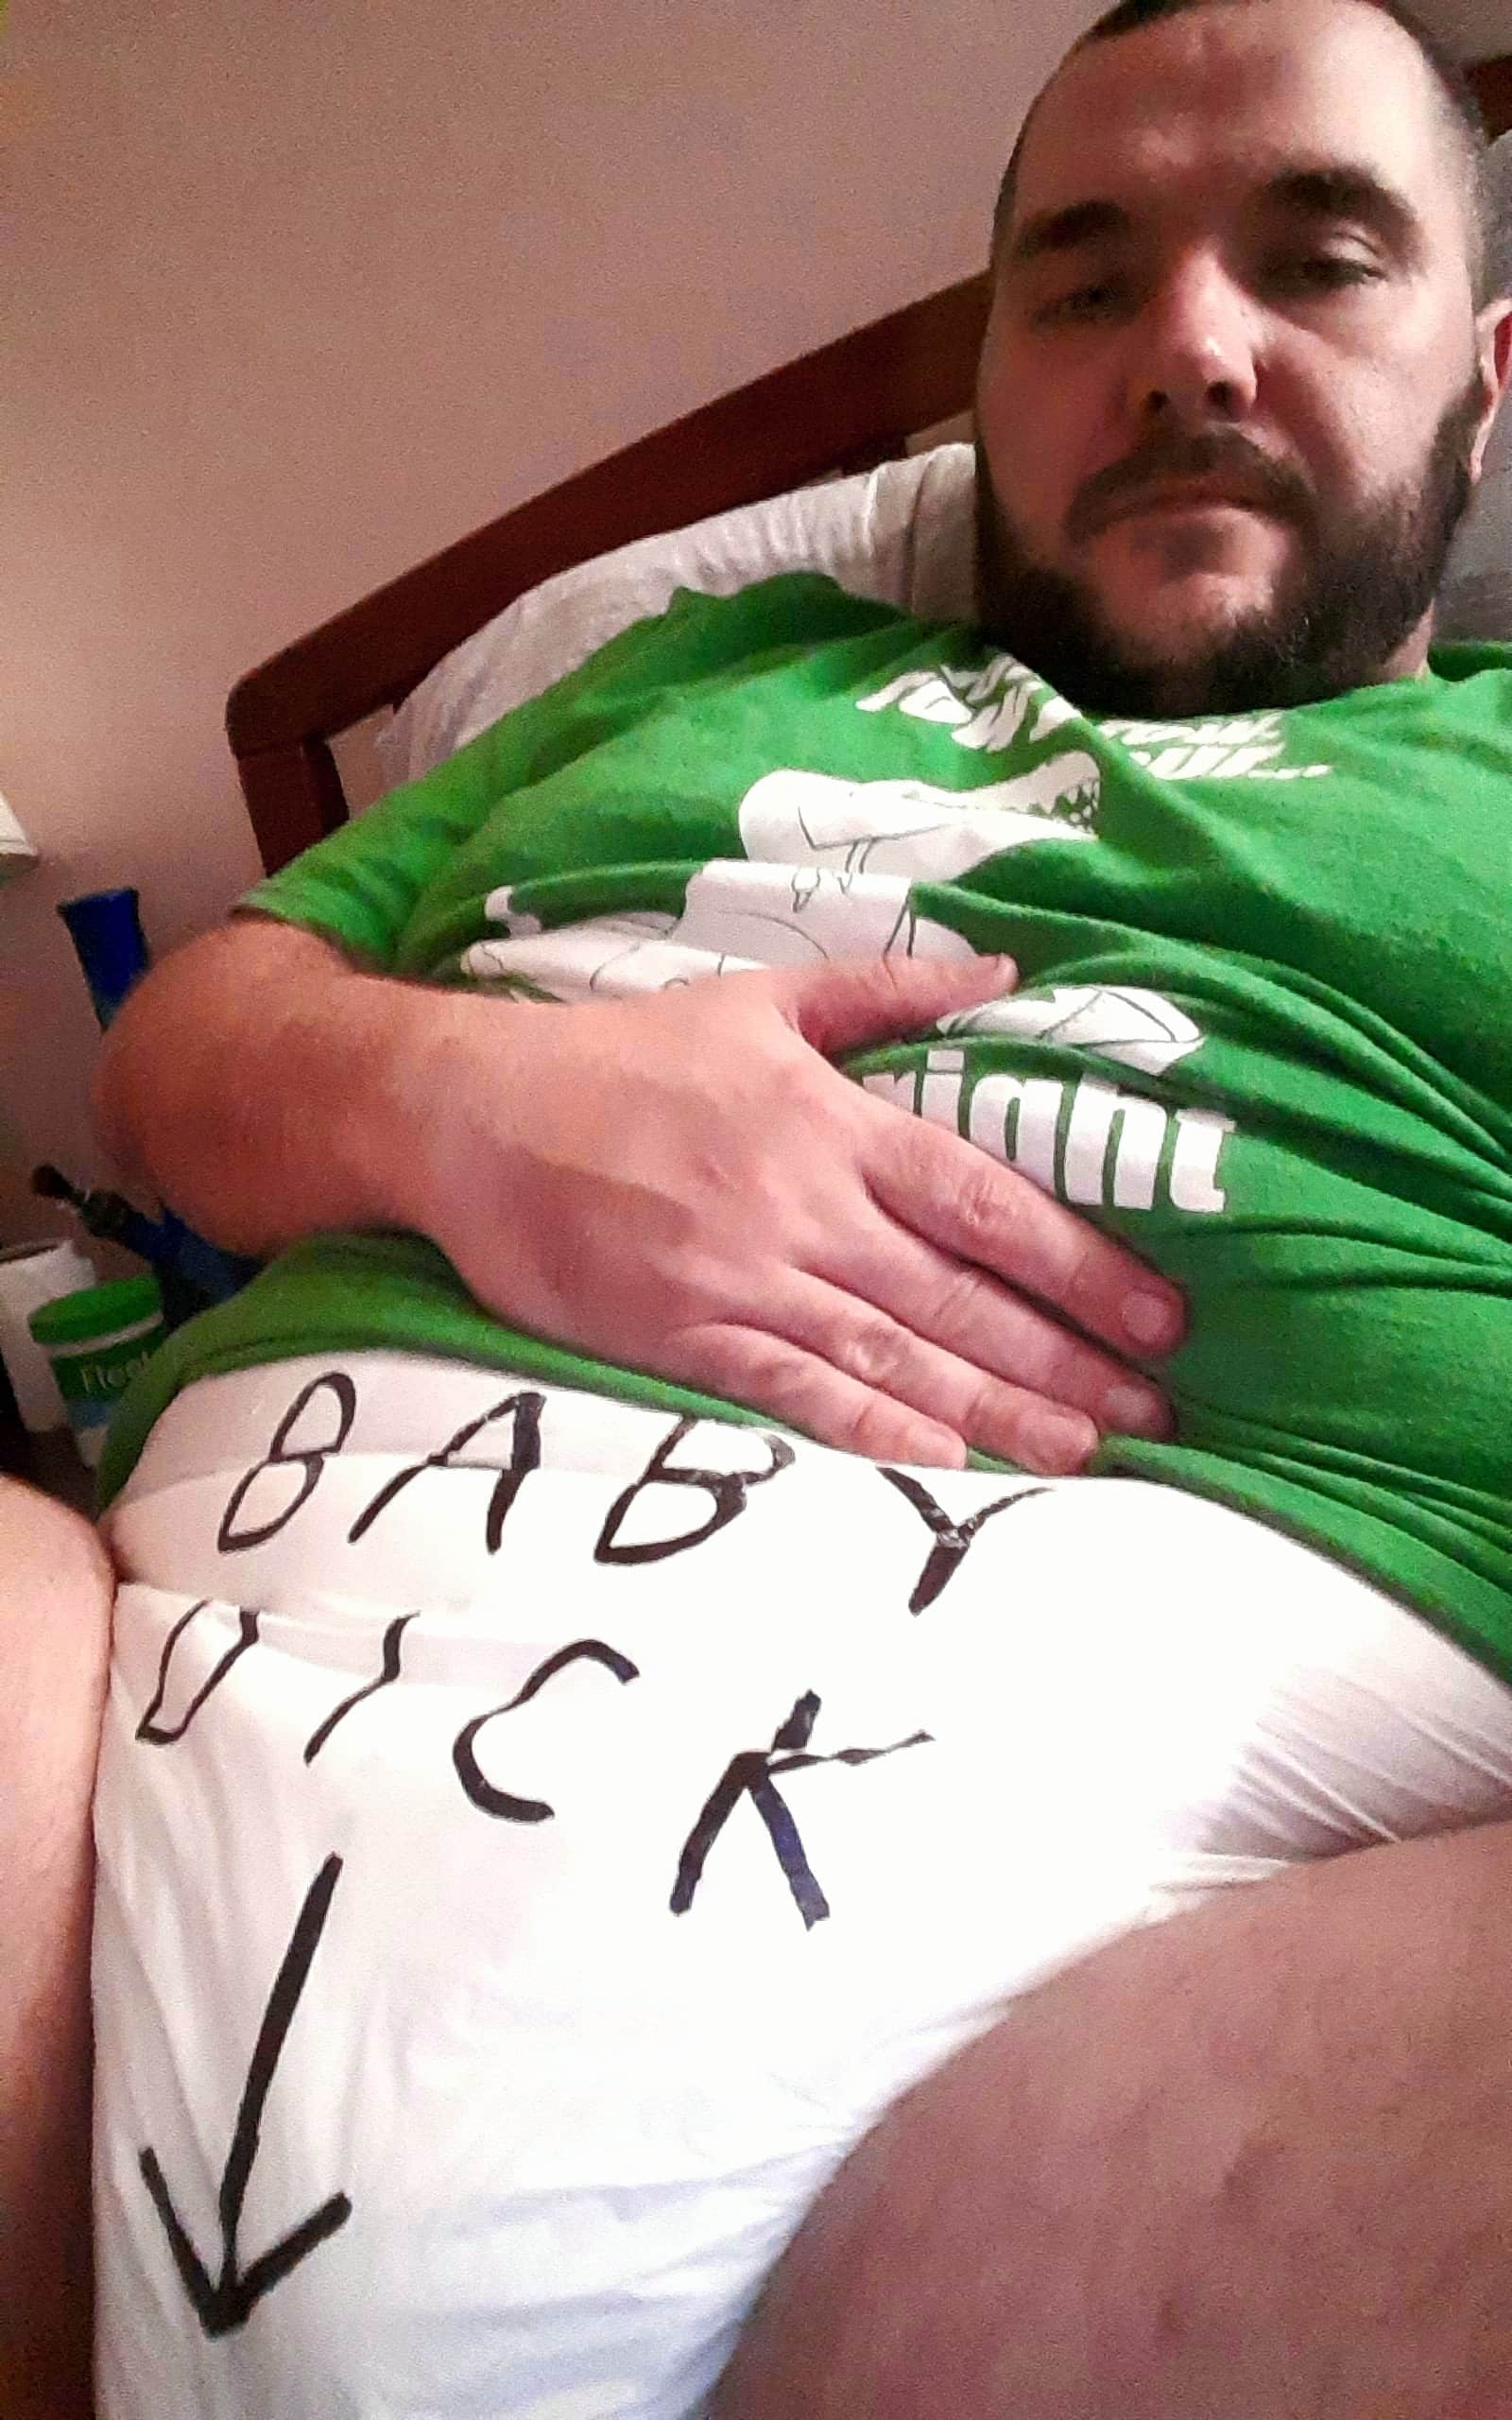 My name is Joshua Slocume, im 38 years old. I love wearing and using diapers for fun. I am a stupid pussy free bitch that does what im told. i love sucking cock and getting fucked in my ass